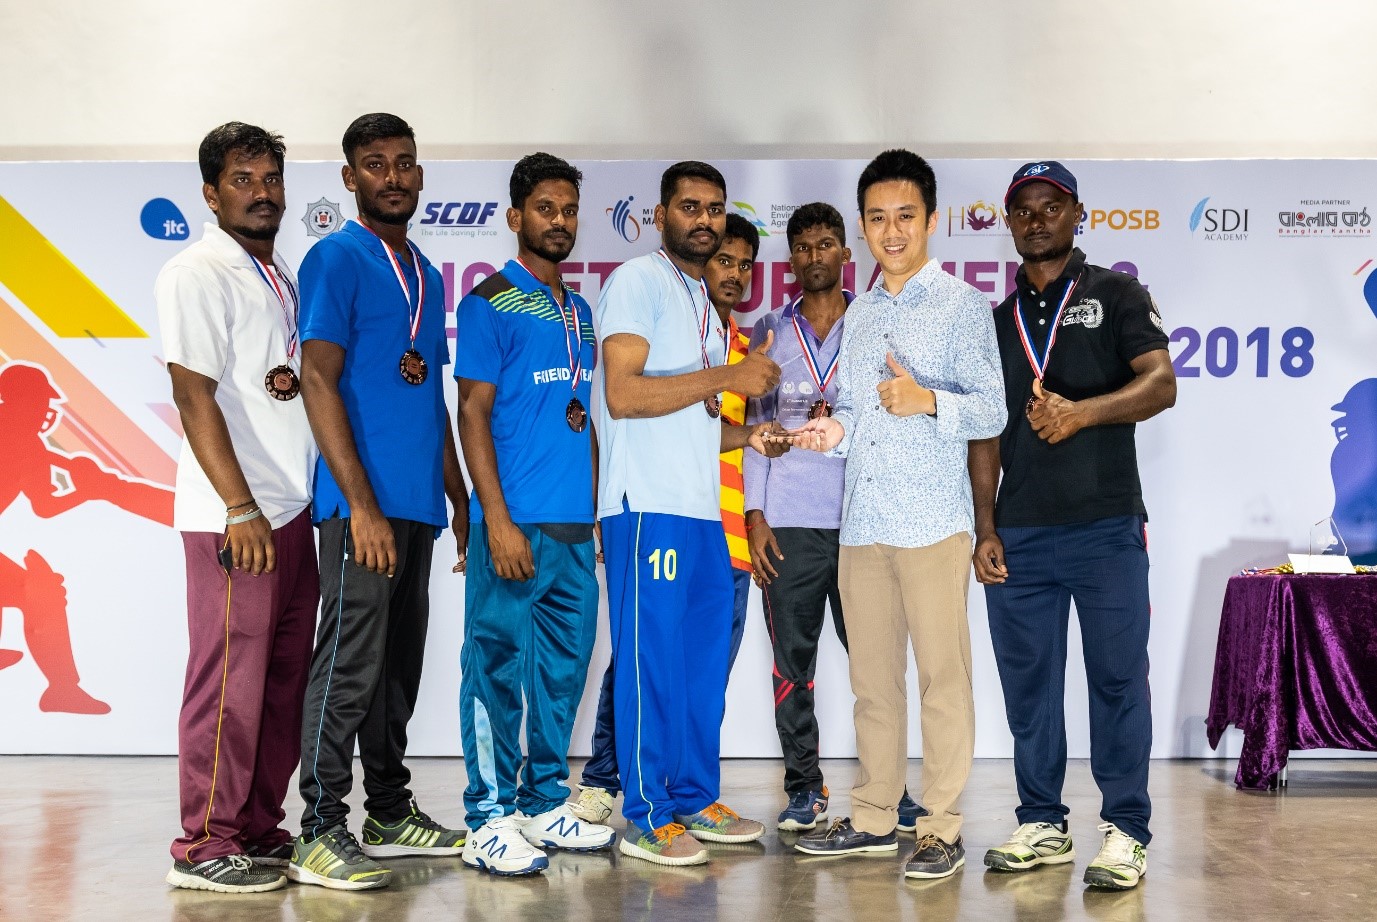 20181122_Cricket_Tournament_and_Migrant_Workers_Carnival_OTHERS_4